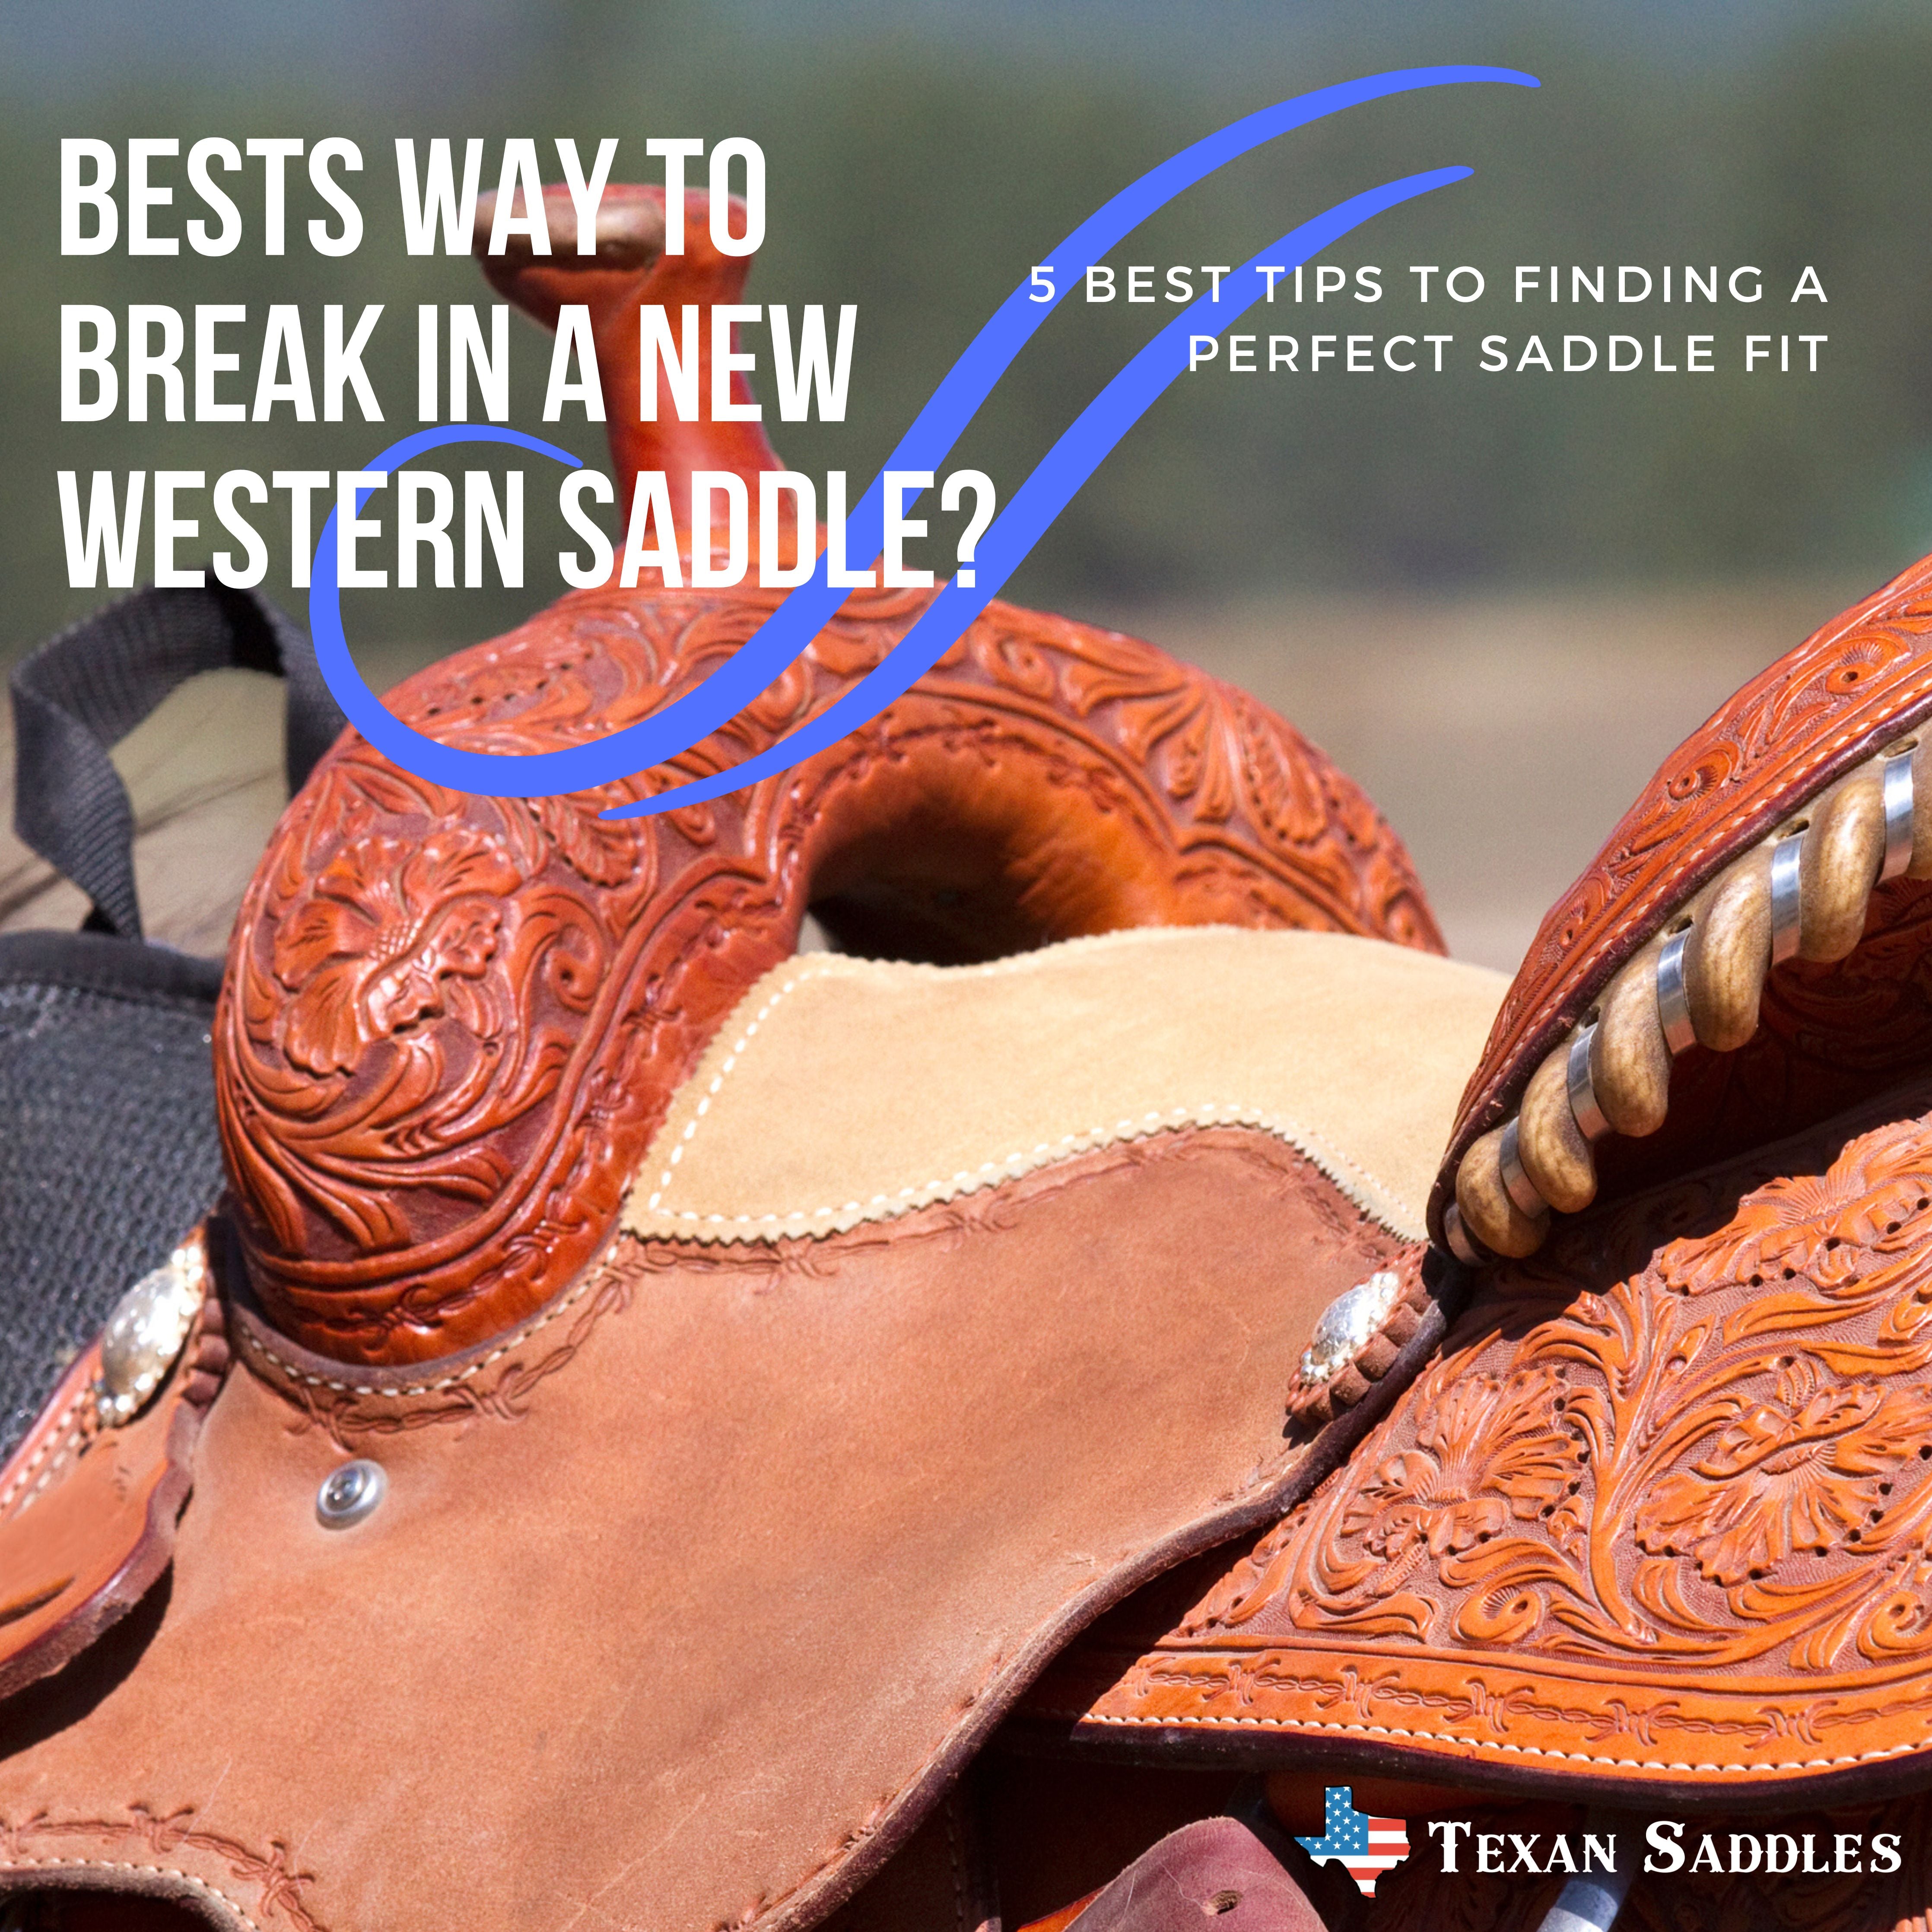 What is the best way to break in a new western saddle?